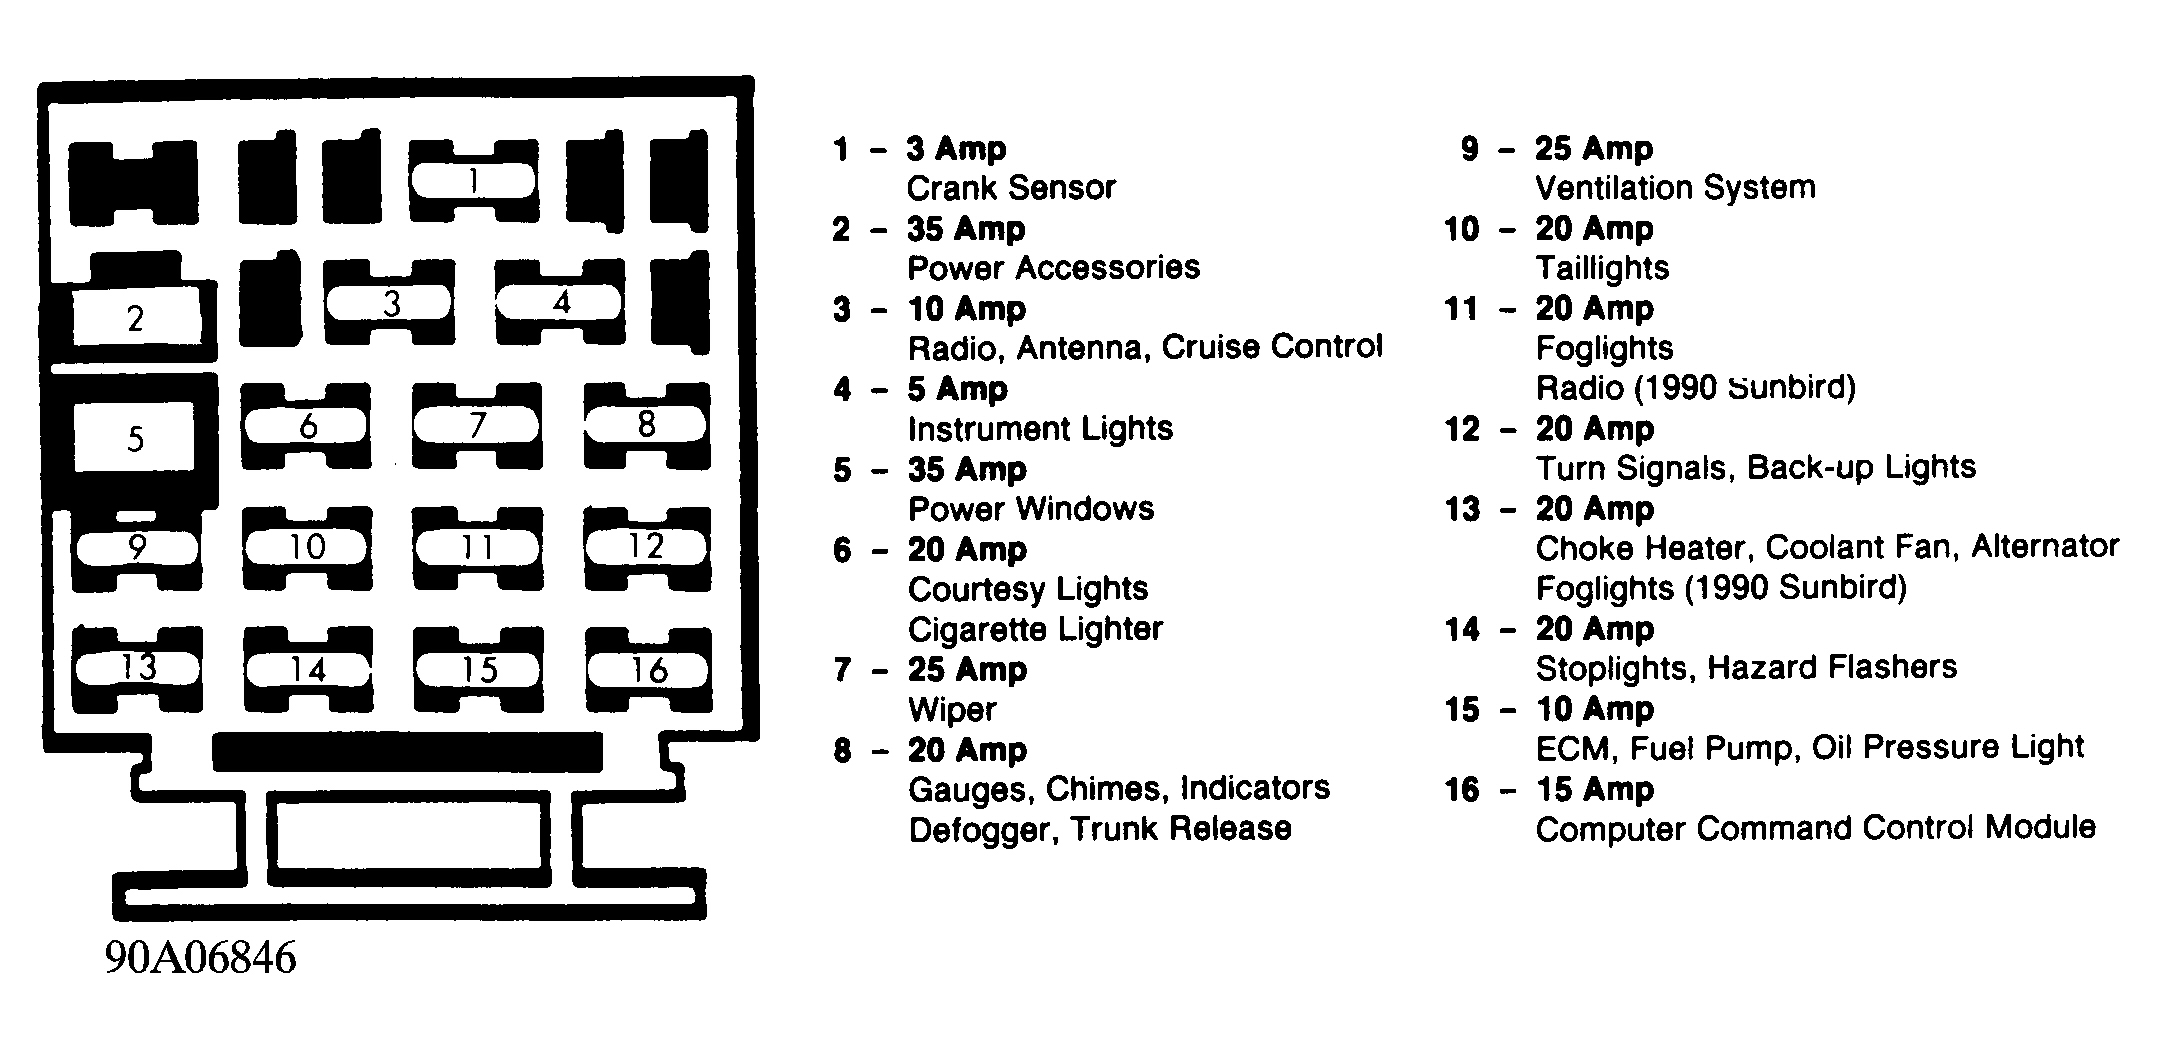 Chevrolet Cavalier VL 1993 - Component Locations -  Fuse Panel Identification (Typical 1983-90 Models)